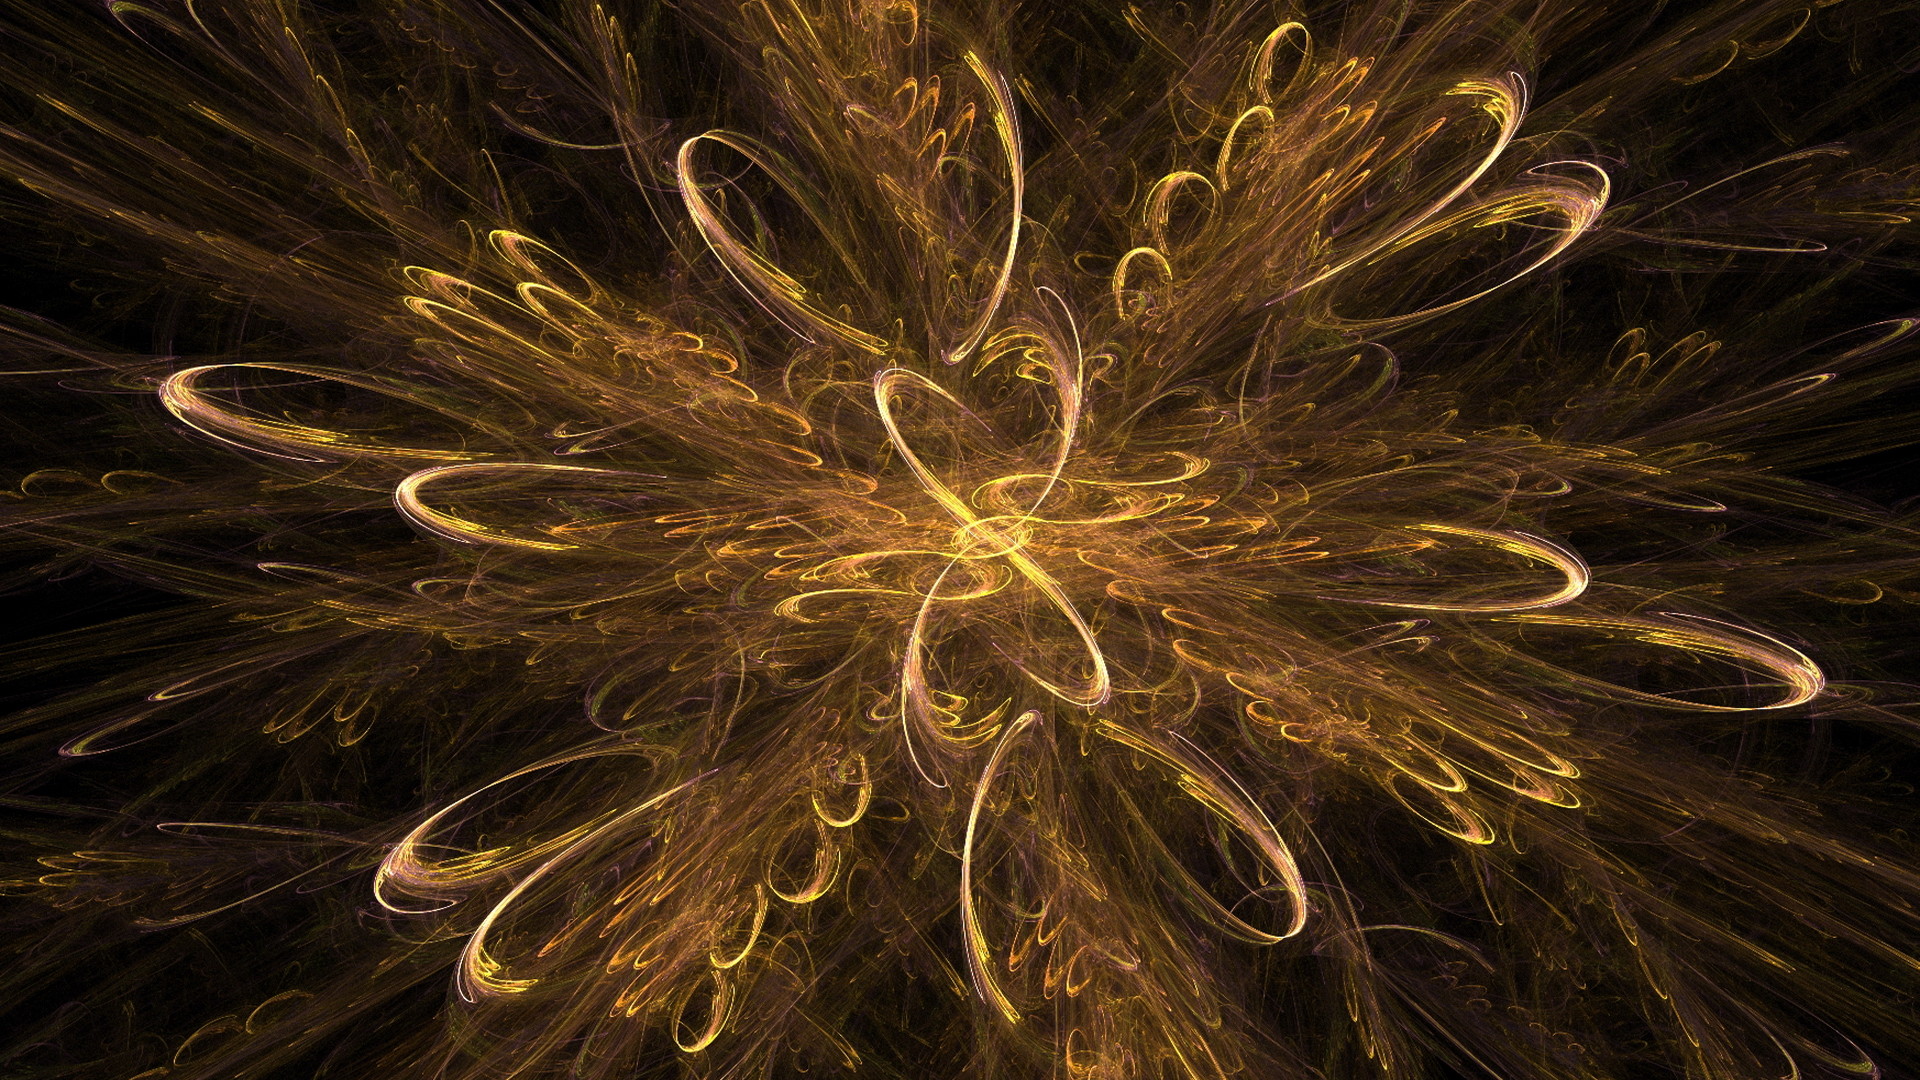 1920x1080 Black And Gold Abstract Wallpaper 8 High Resolution Wallpaper